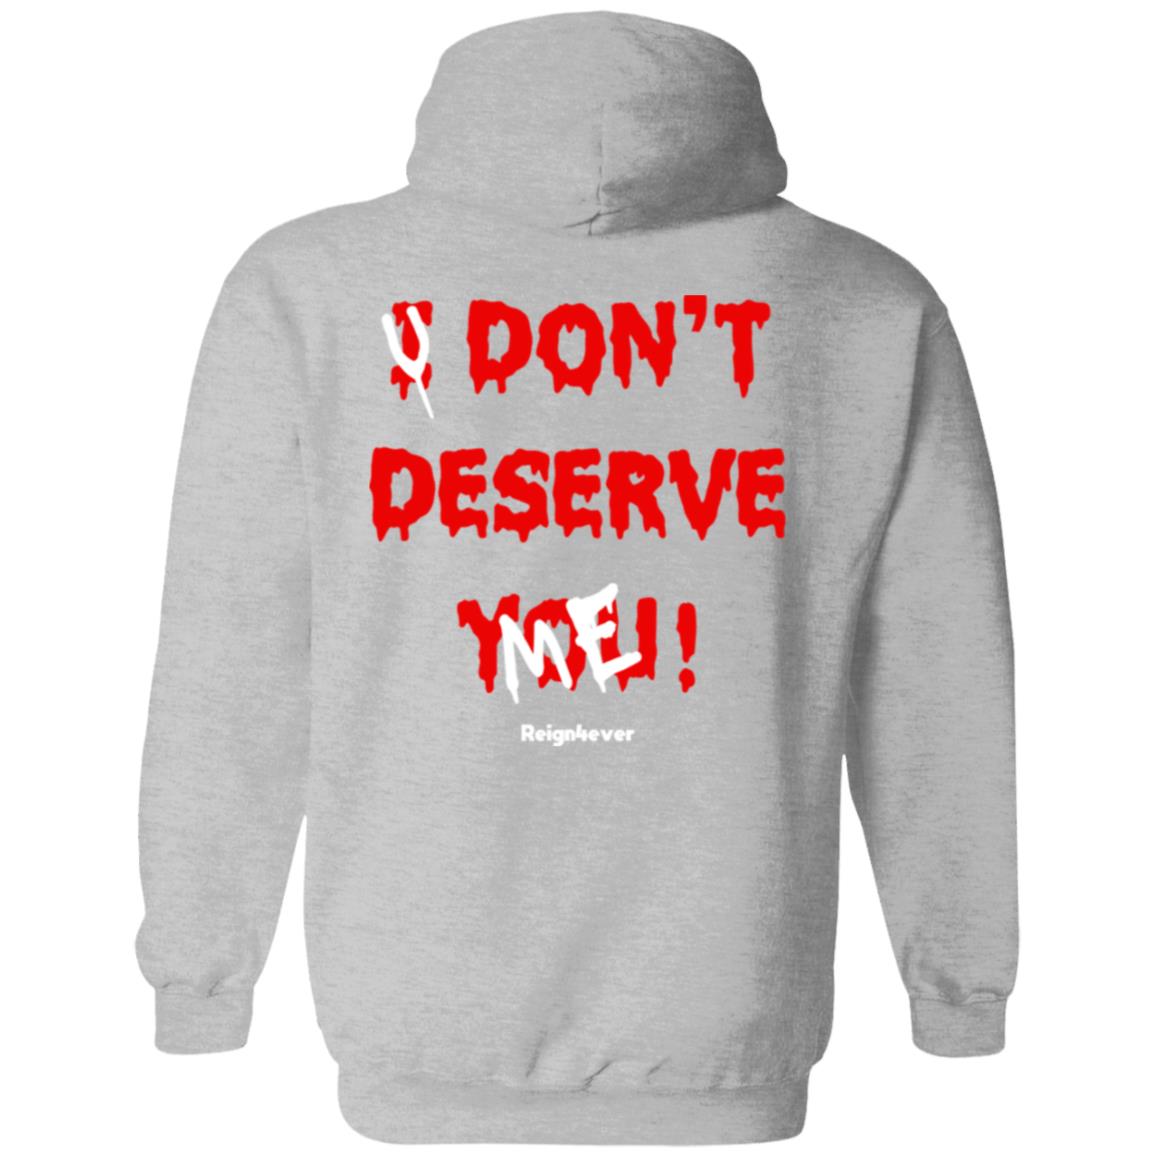 You Don't Deserve Me Hoodie